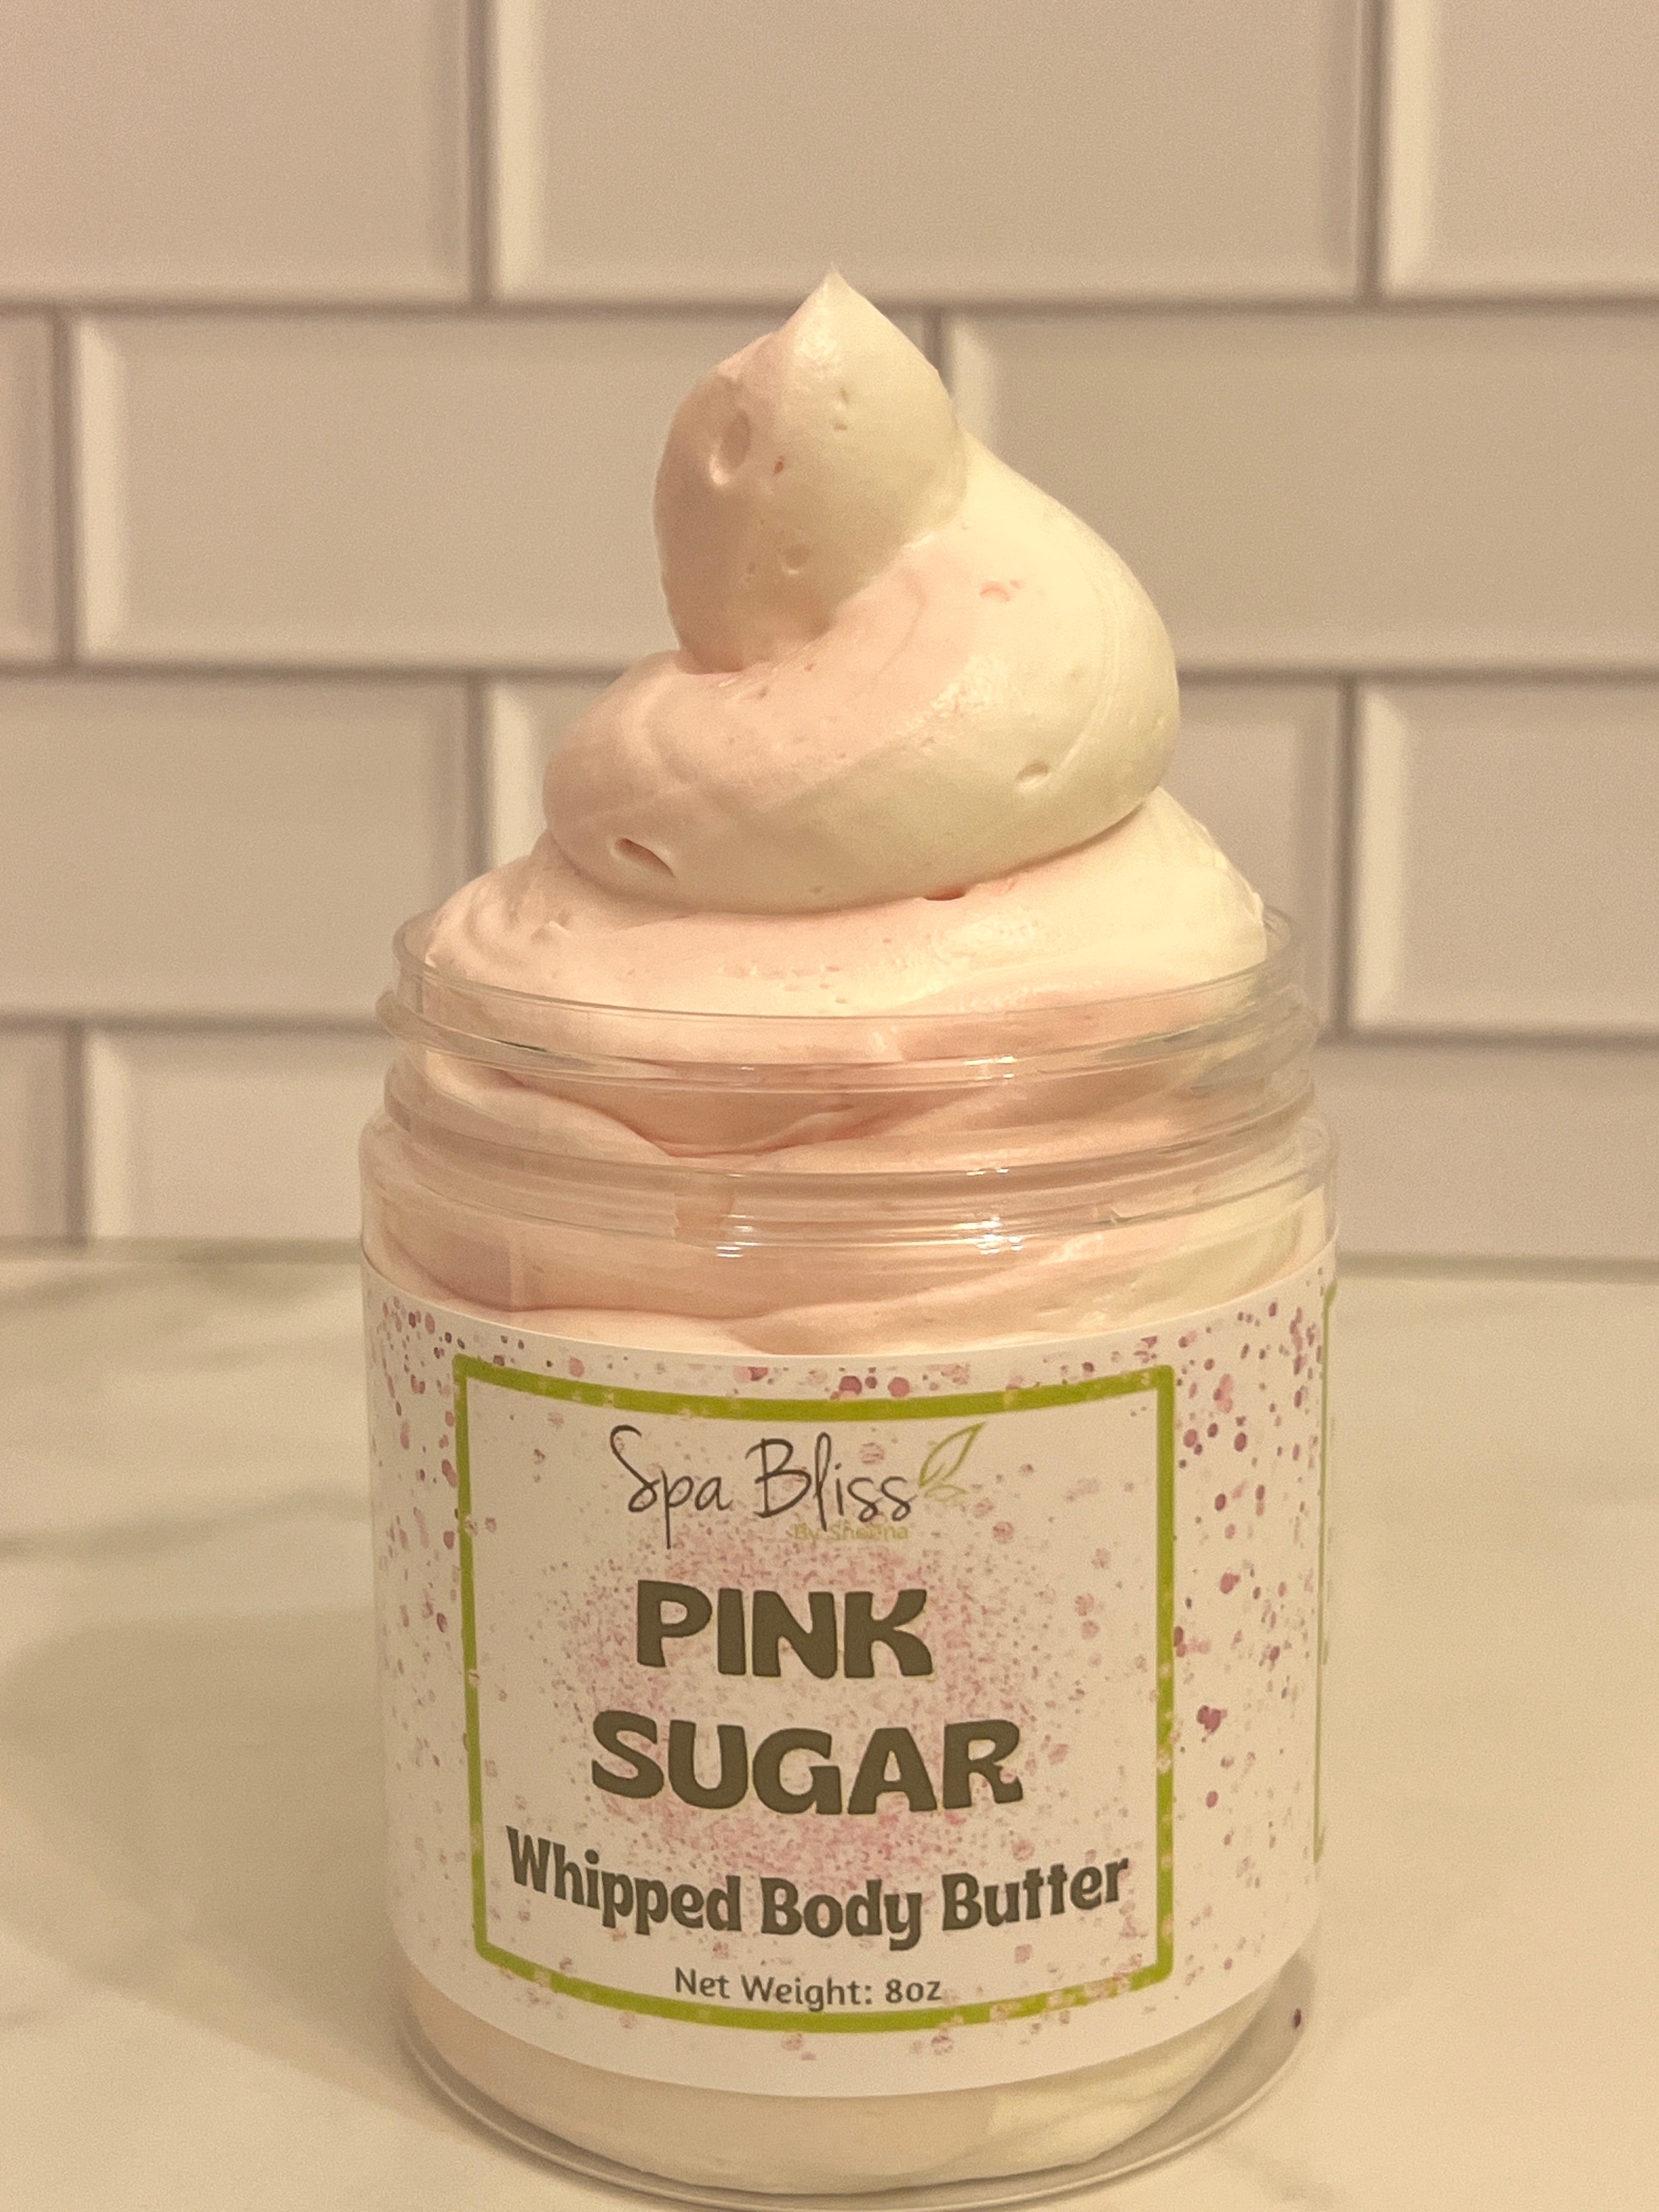 The Pink Sugar Experience